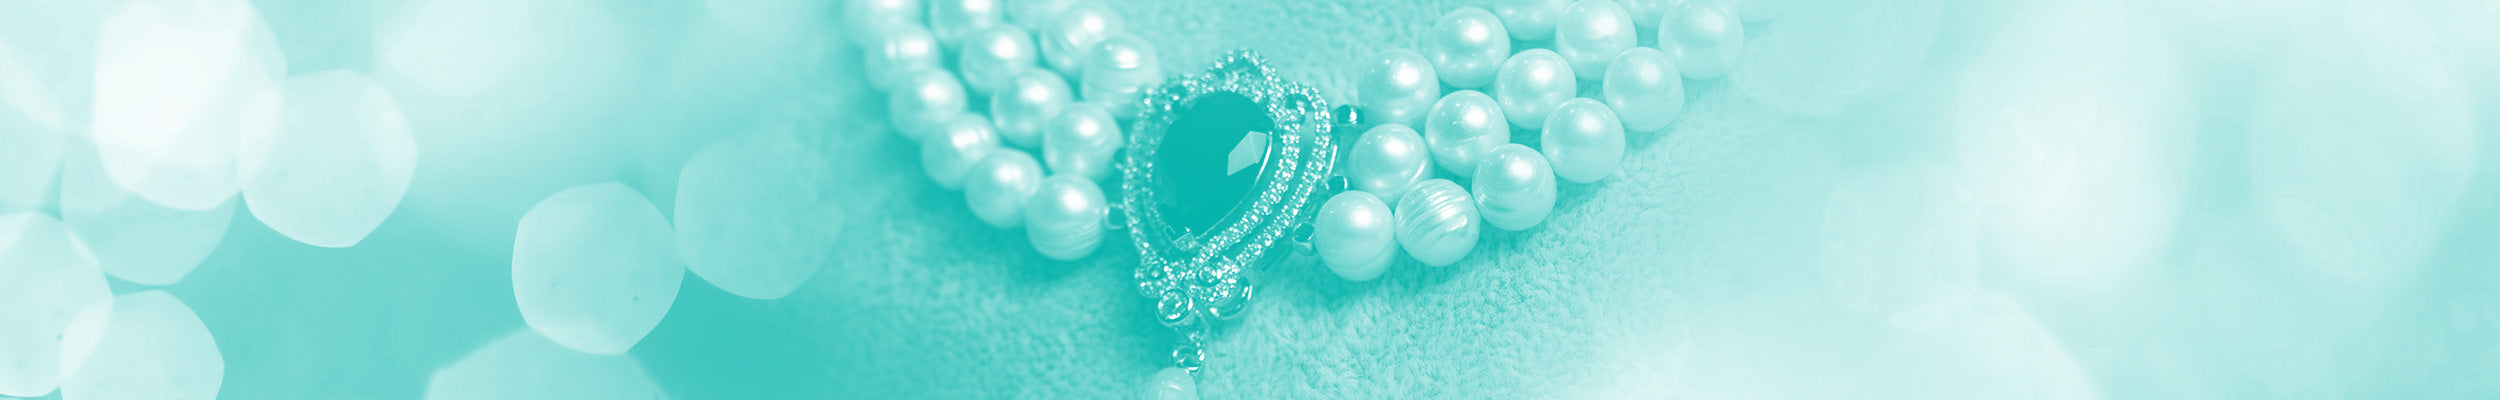 A vintage pearl and black gemstone 3 strand necklace with a teal background.